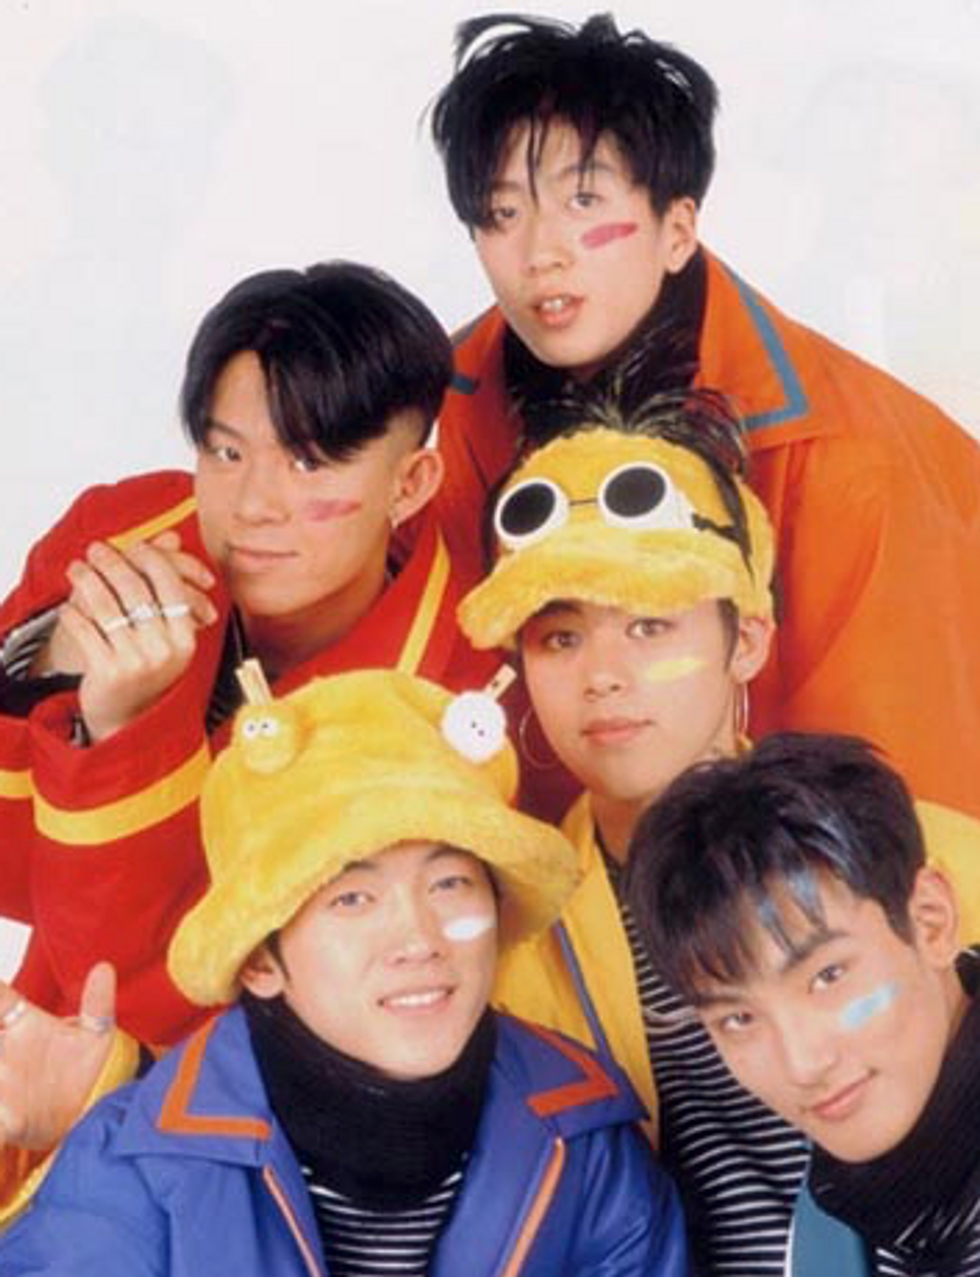 Young Korean teens wearing bright clothes, fuzzy hats, and pastel marks under their eyes kind of like American football players